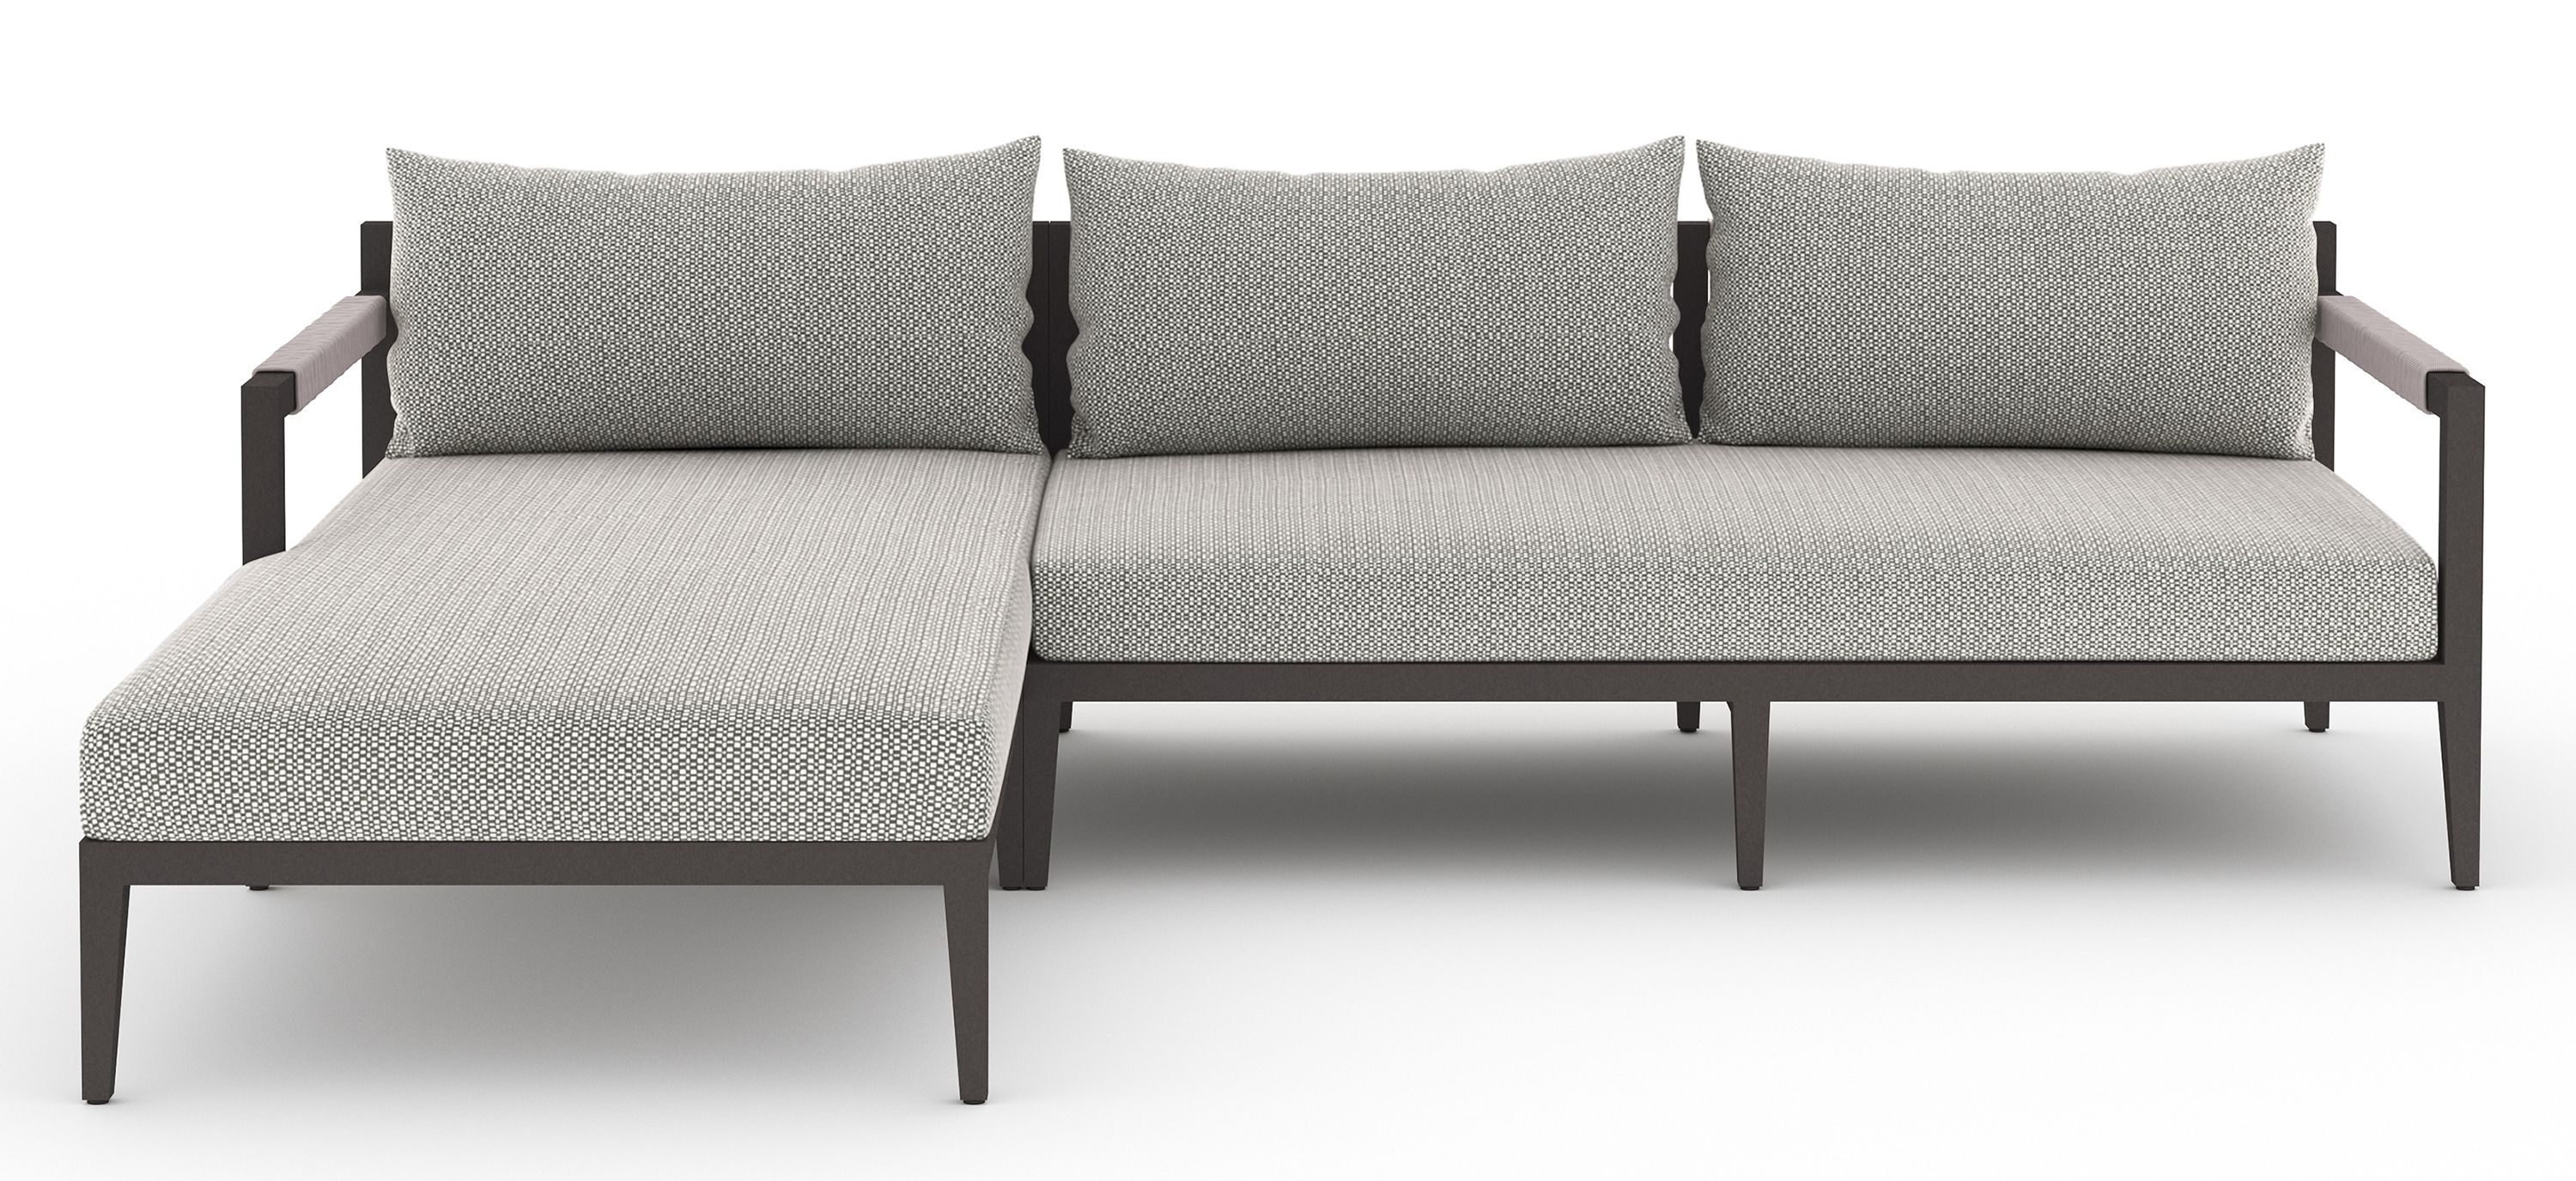 Sherwood 2-pc. Left Arm Facing Outdoor Sectional Sofa with Chaise